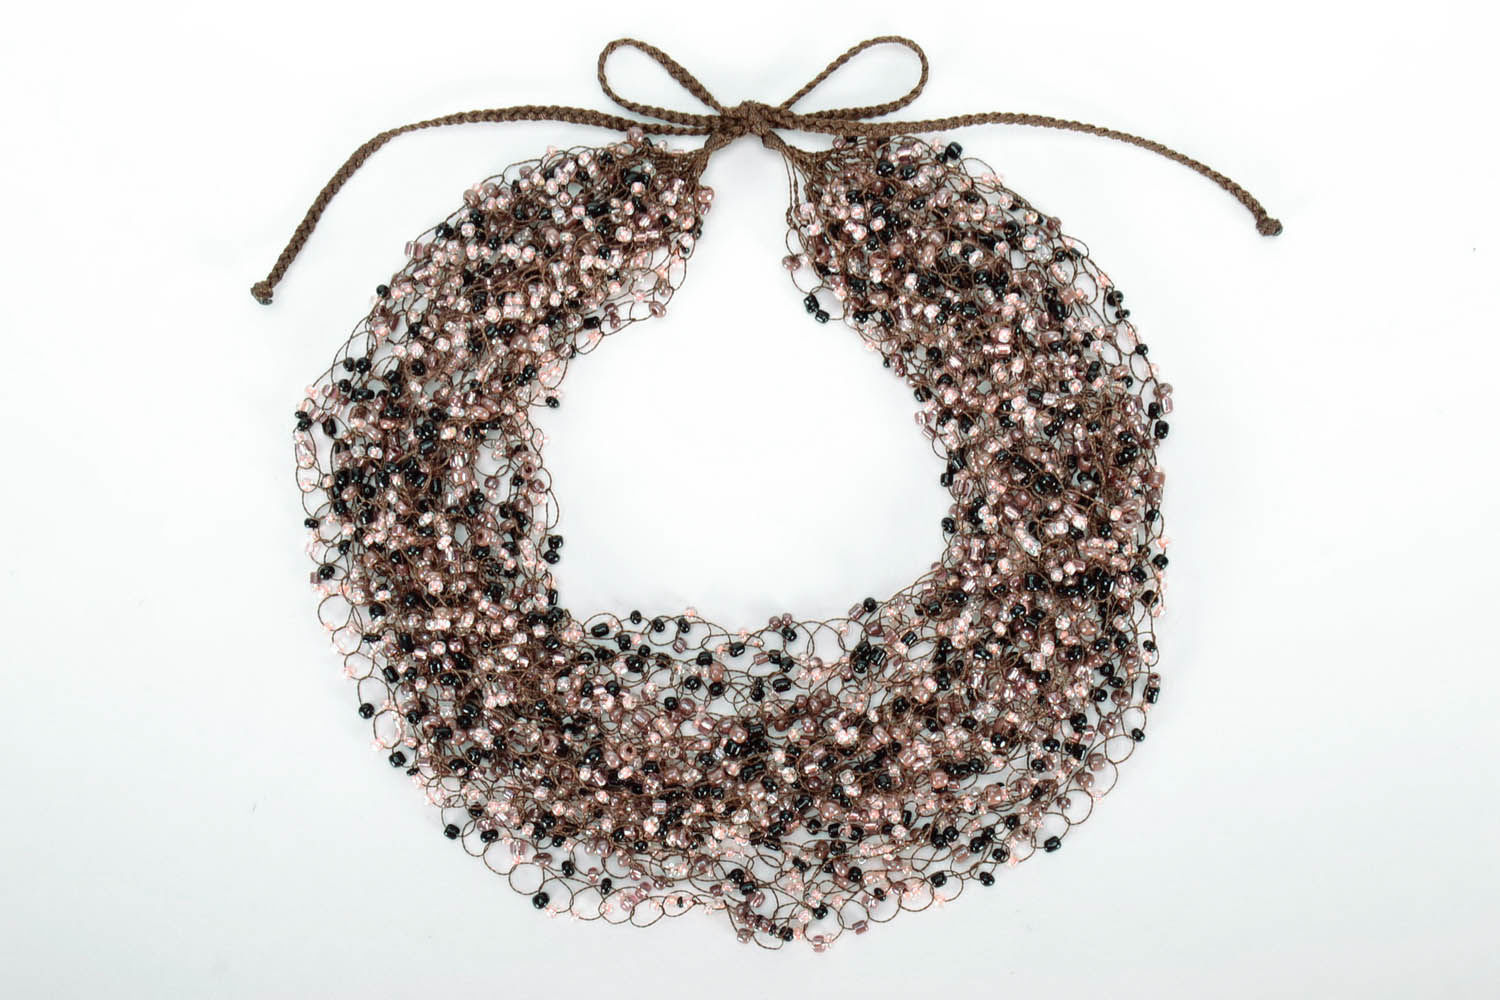 Necklace made of beads photo 3